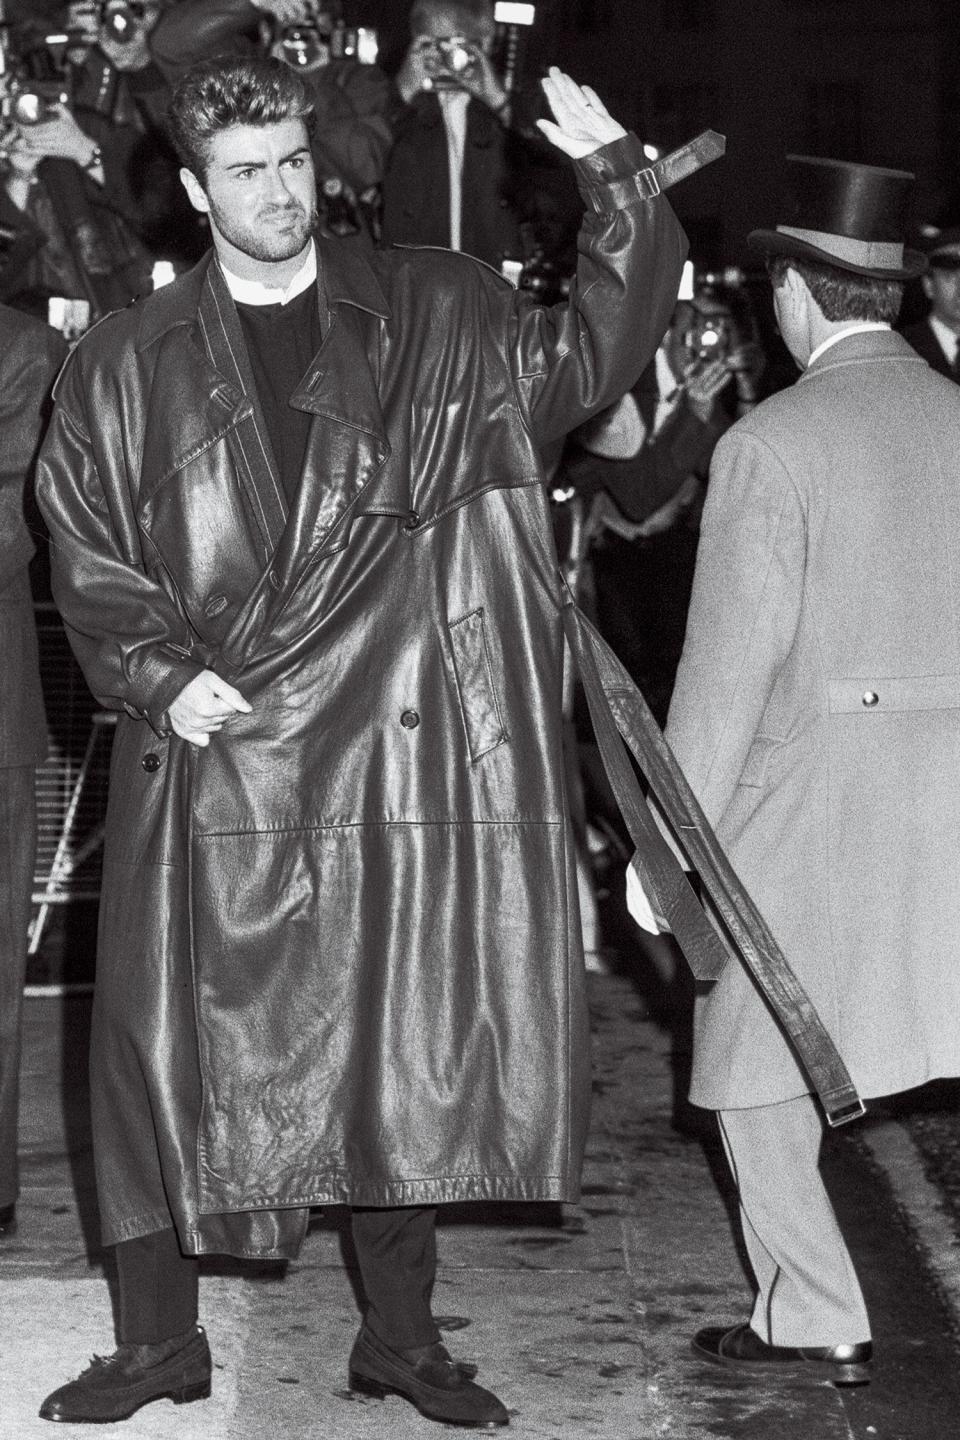 Michael and his oversize trench at the launch party for his first solo album, Faith, in 1987 at London’s Savoy Hotel.